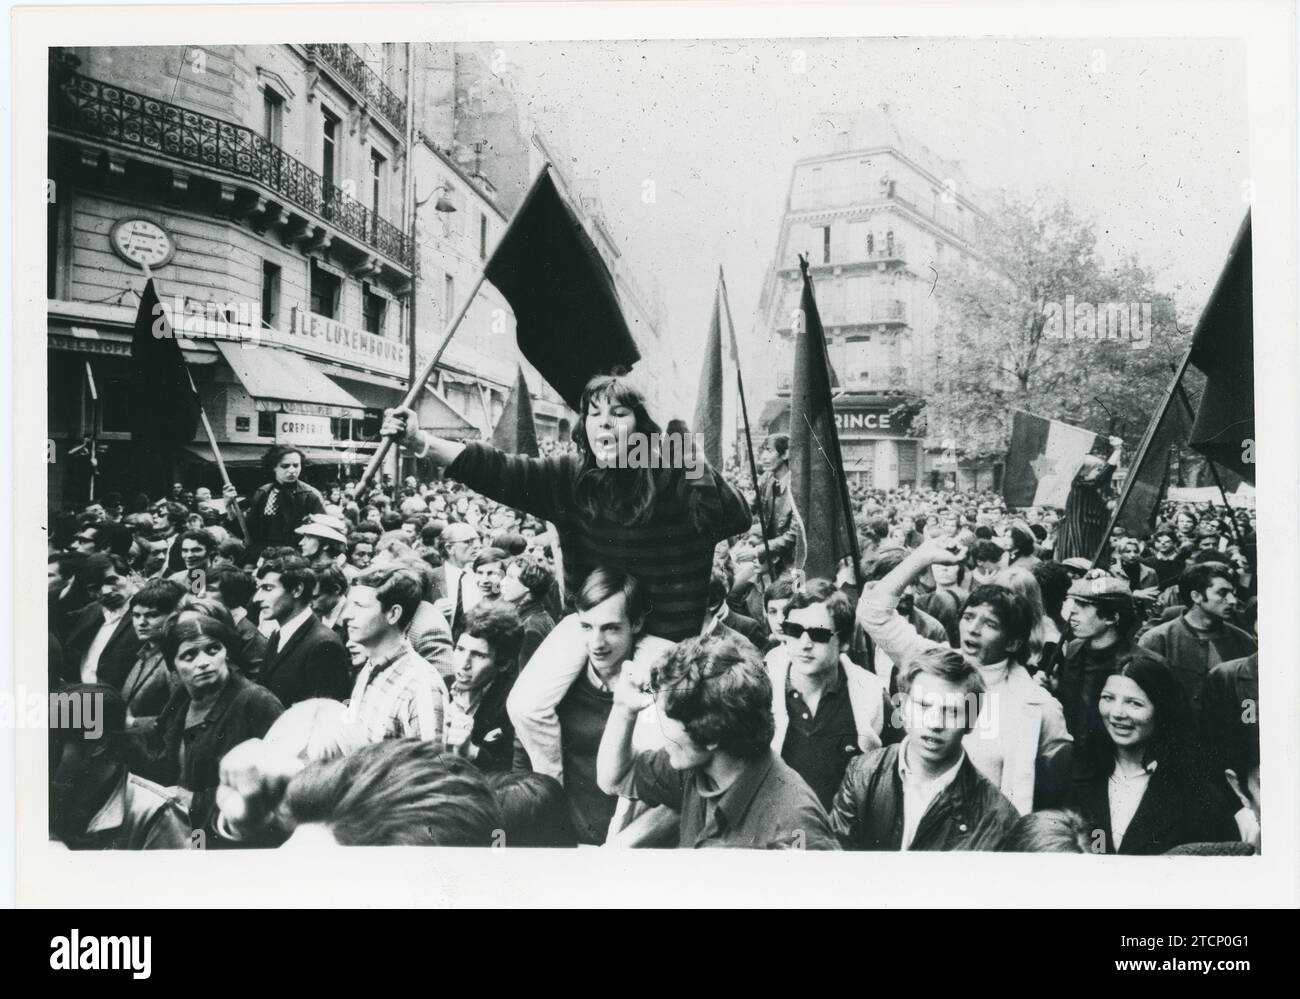 France, May 1968. Students in one of the massive demonstrations. Credit: Album / Archivo ABC Stock Photo